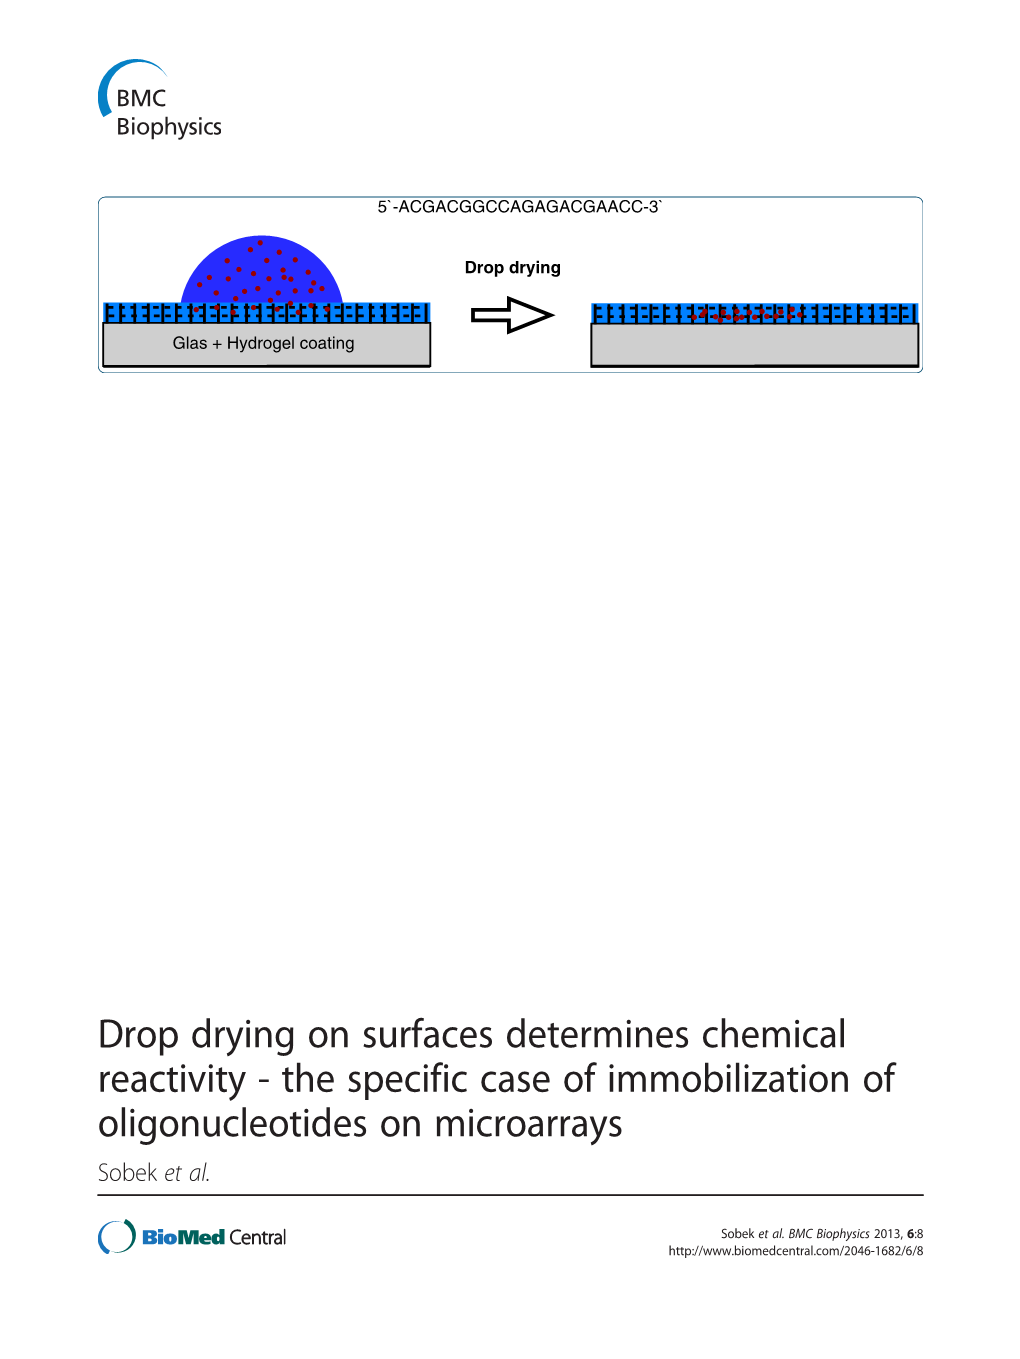 Drop Drying on Surfaces Determines Chemical Reactivity - the Specific Case of Immobilization of Oligonucleotides on Microarrays Sobek Et Al